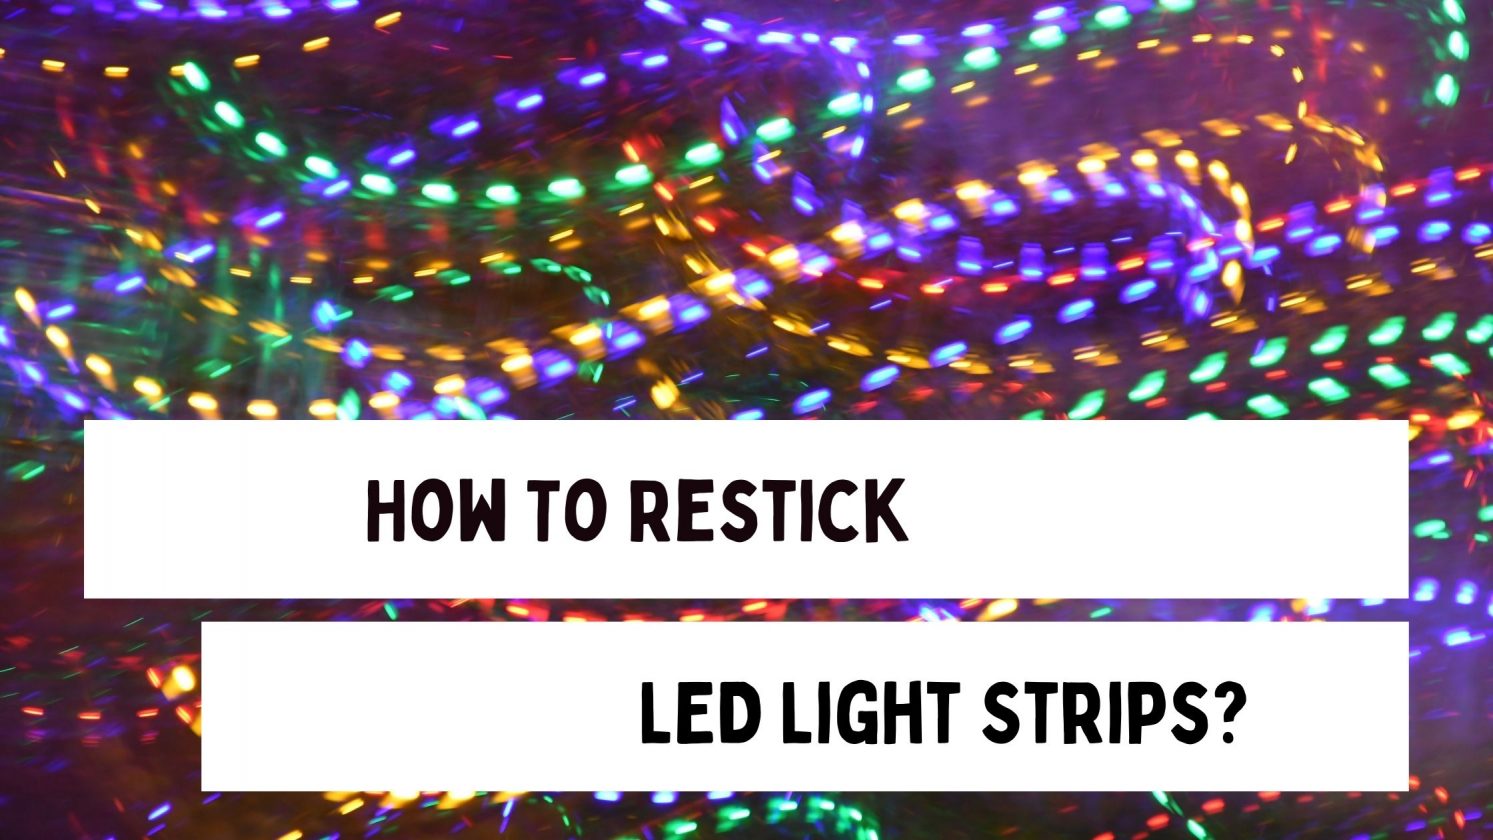 How To Restick Led Light Strips